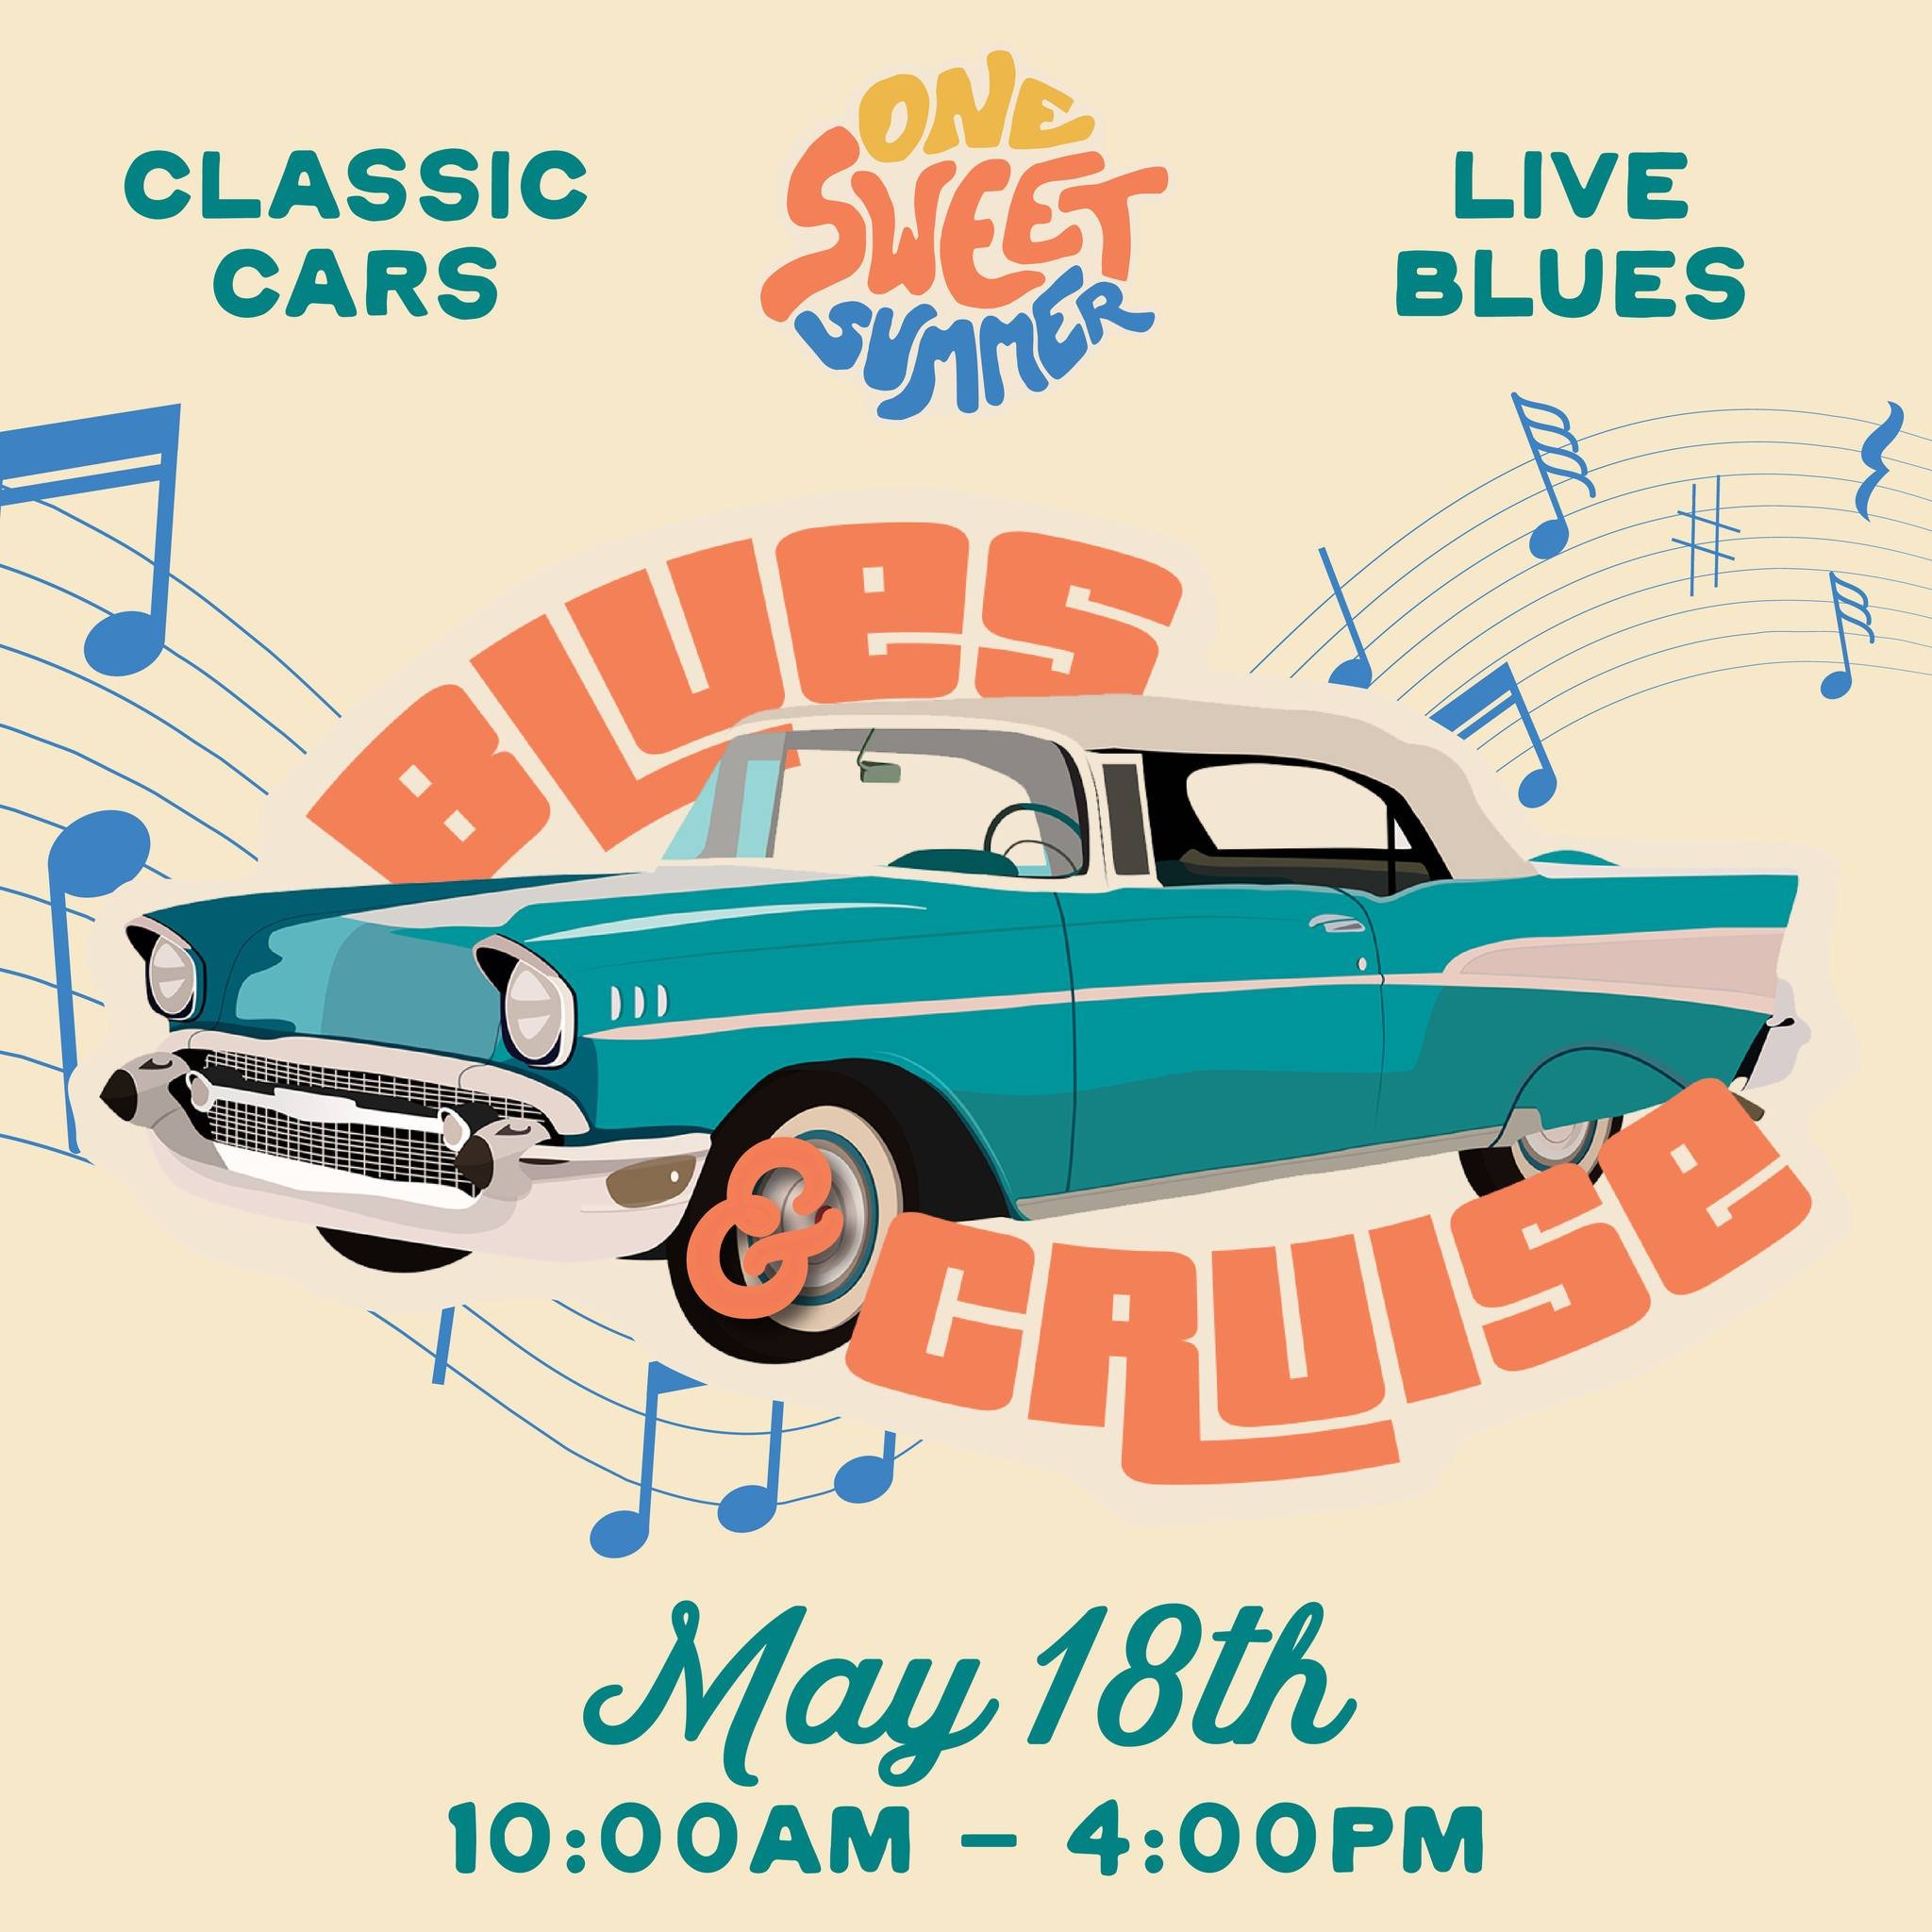 Today's the day! Our Blues and Cruise event starts at 10am! Bring the family downtown for this FREE, public event -- car show stars at 10am and music starts at 12:00!

Blues music can be found in 2 locations Downtown:
5th Street Stage- 
Noon-1:15pm- 